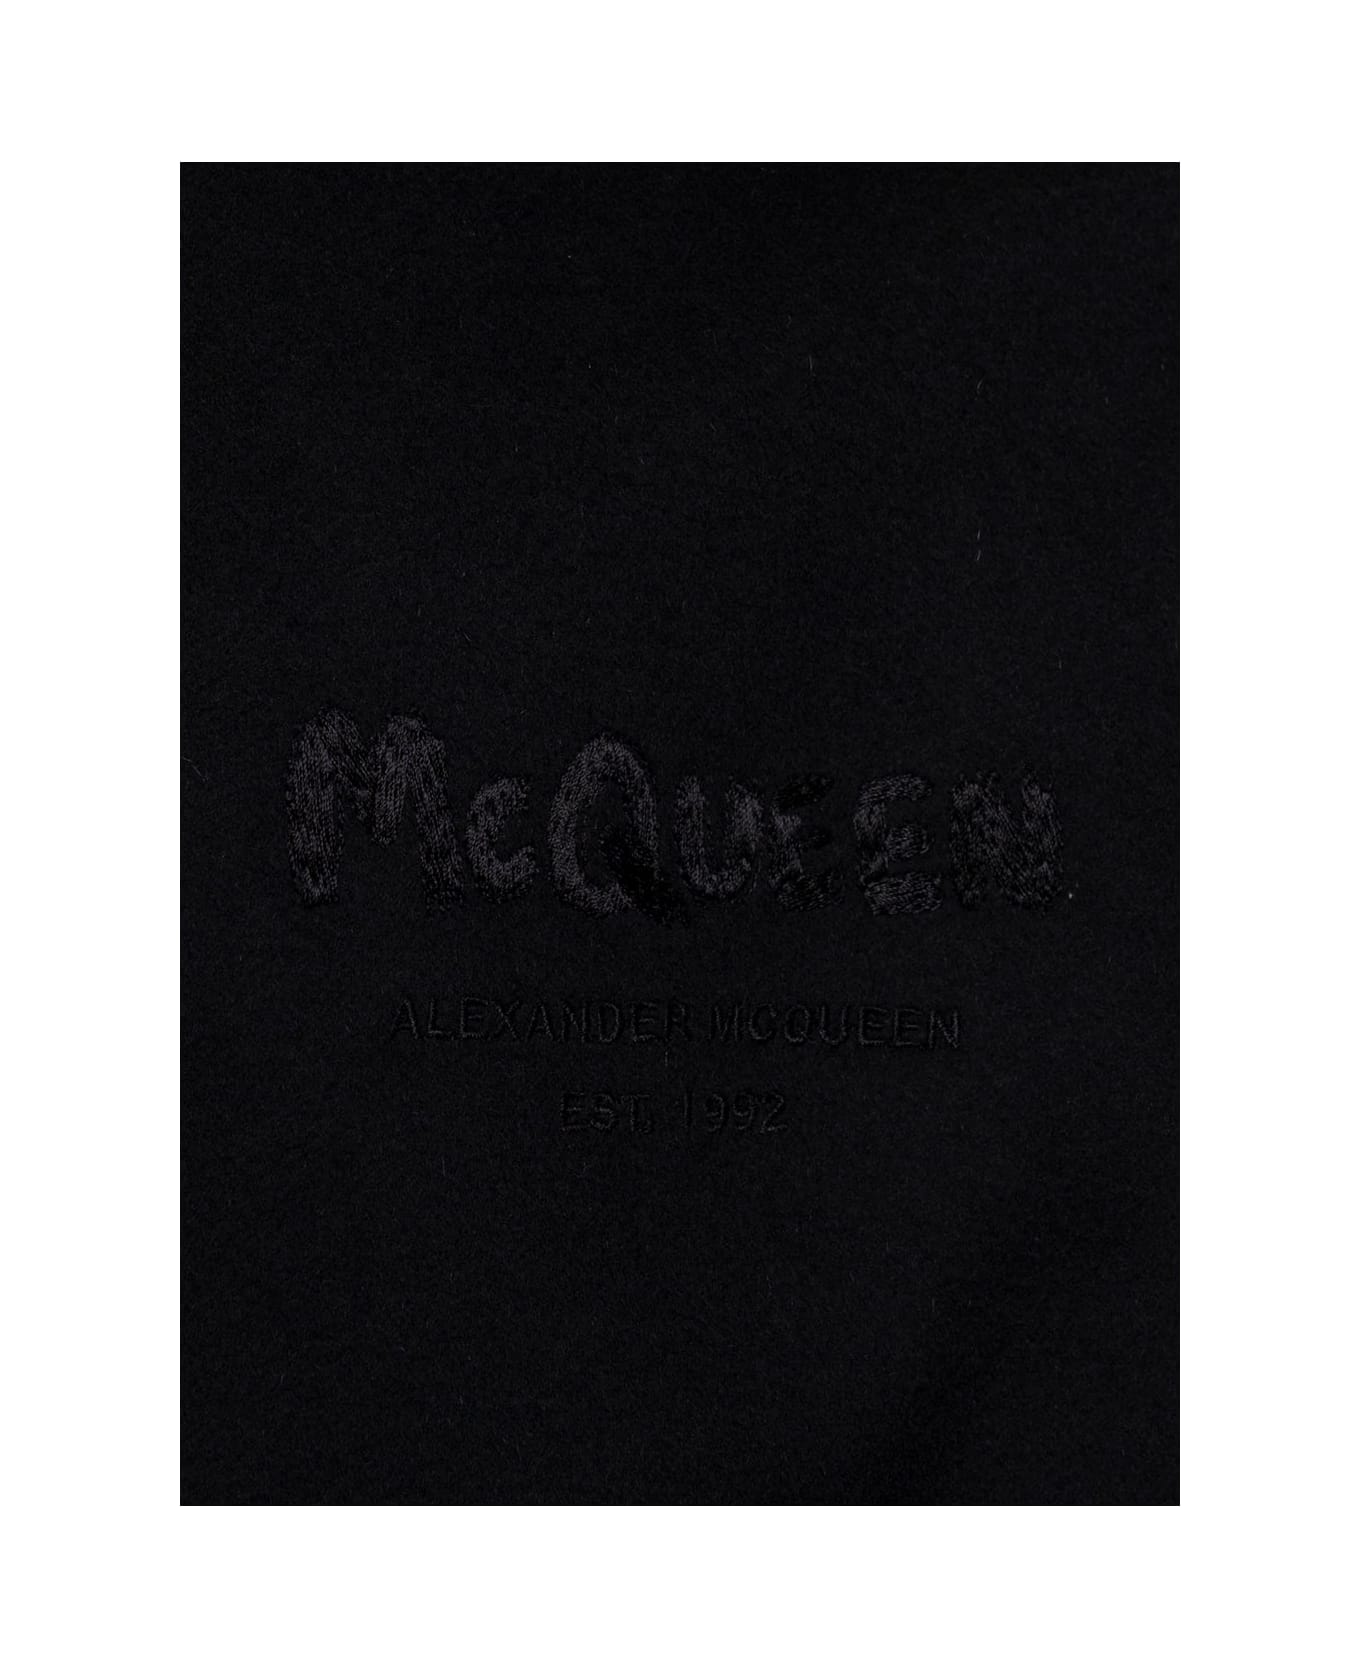 Alexander McQueen Man's Black Bomber Wool And Leather Jacket - BLACK